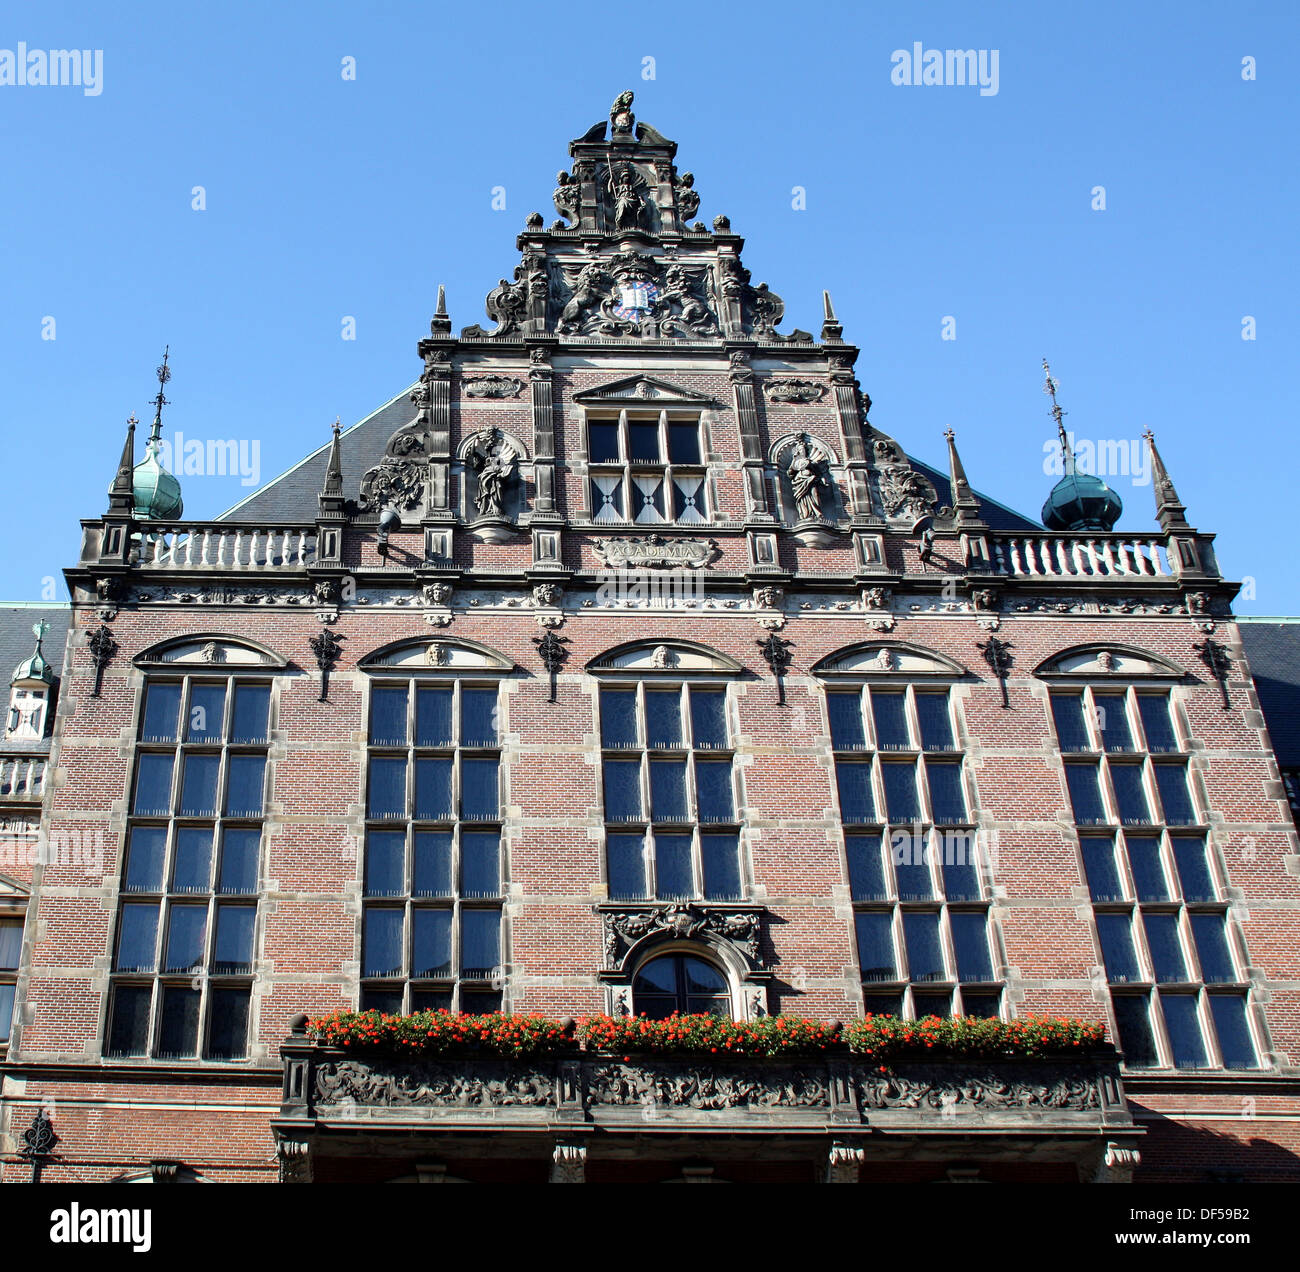 The facade of the university from 1614 in the city of Groningen Stock Photo